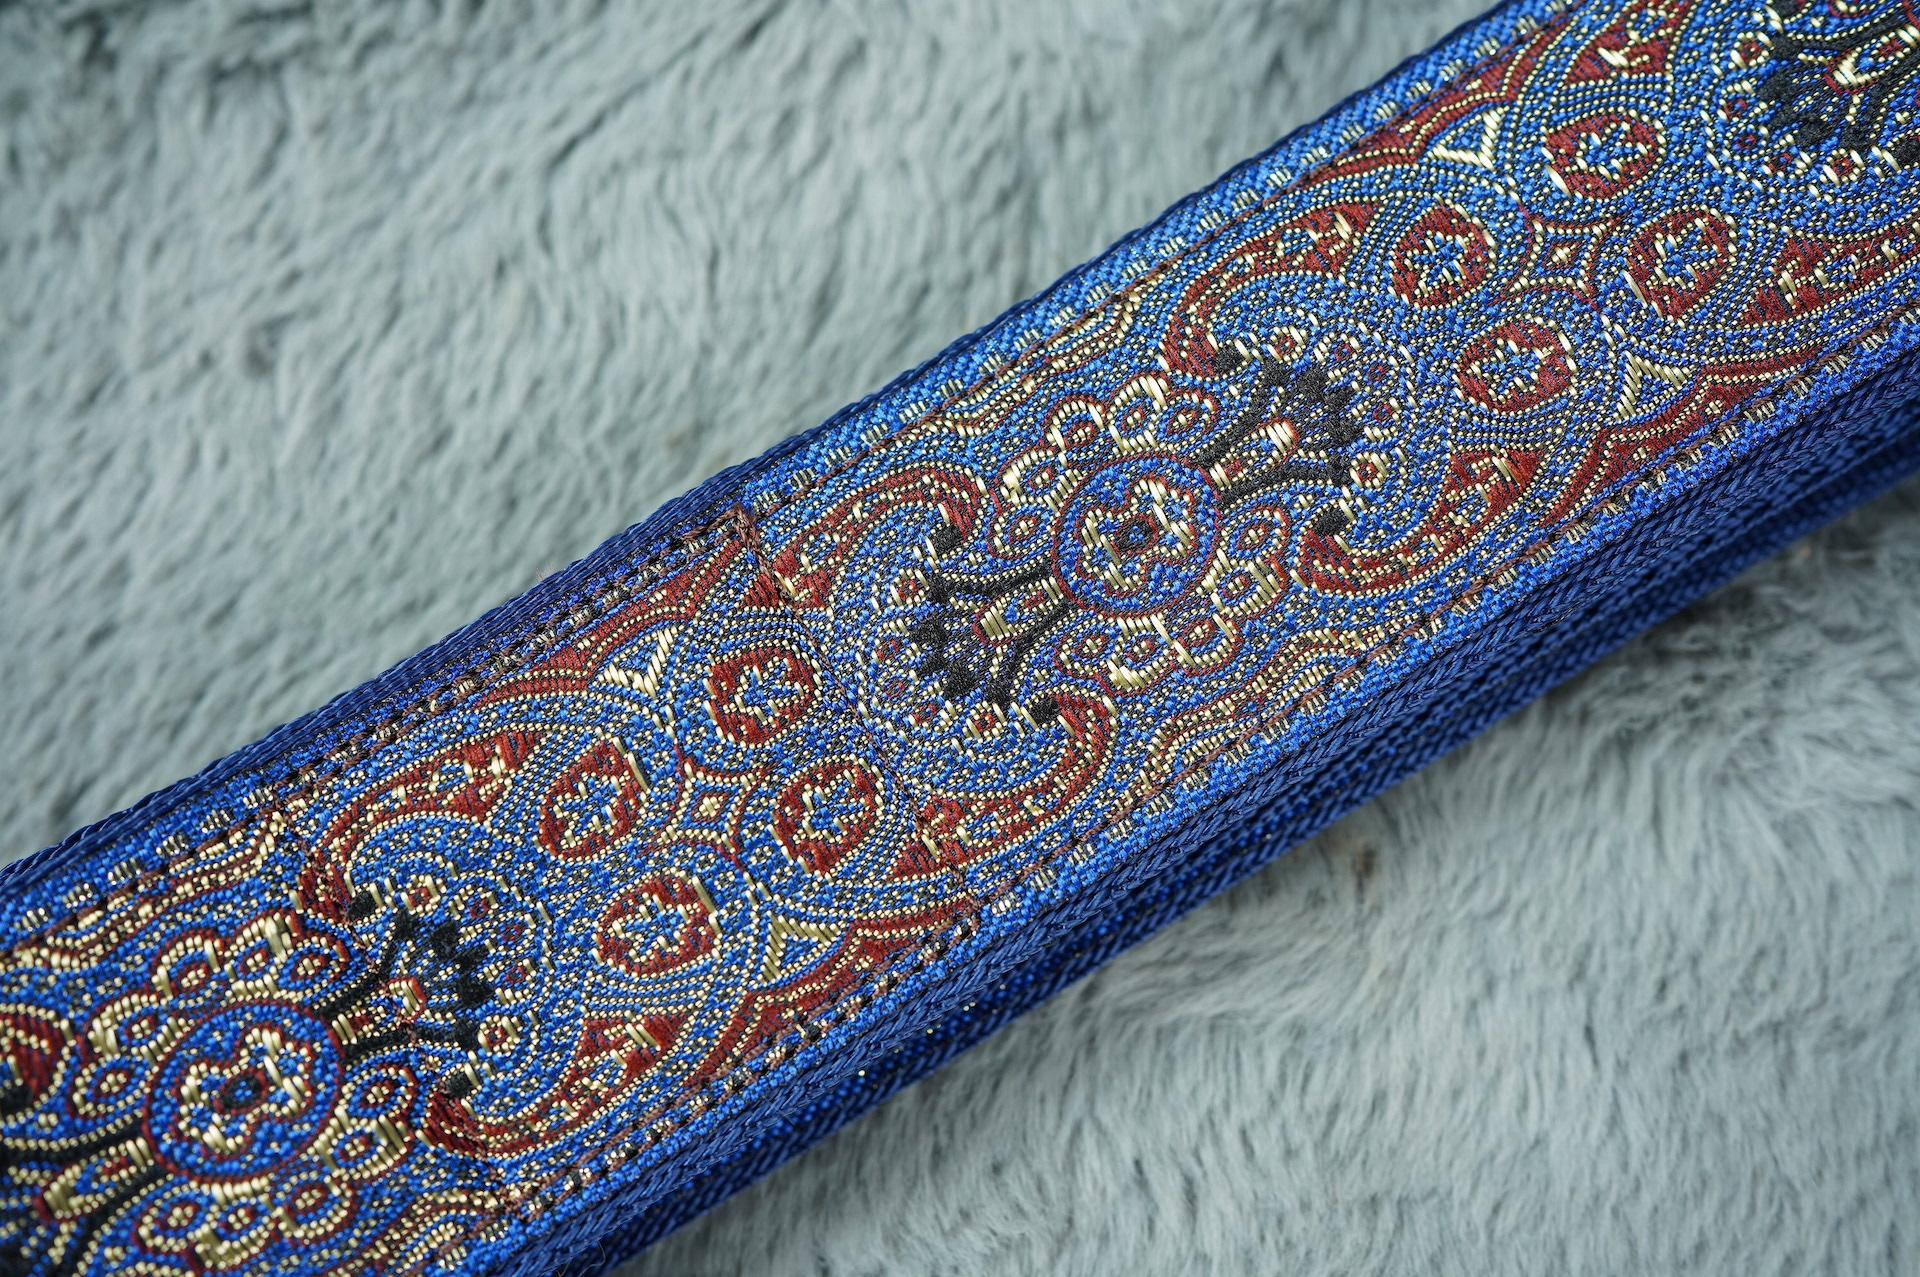 Air Straps Limited Edition 'Azure' Guitar Strap